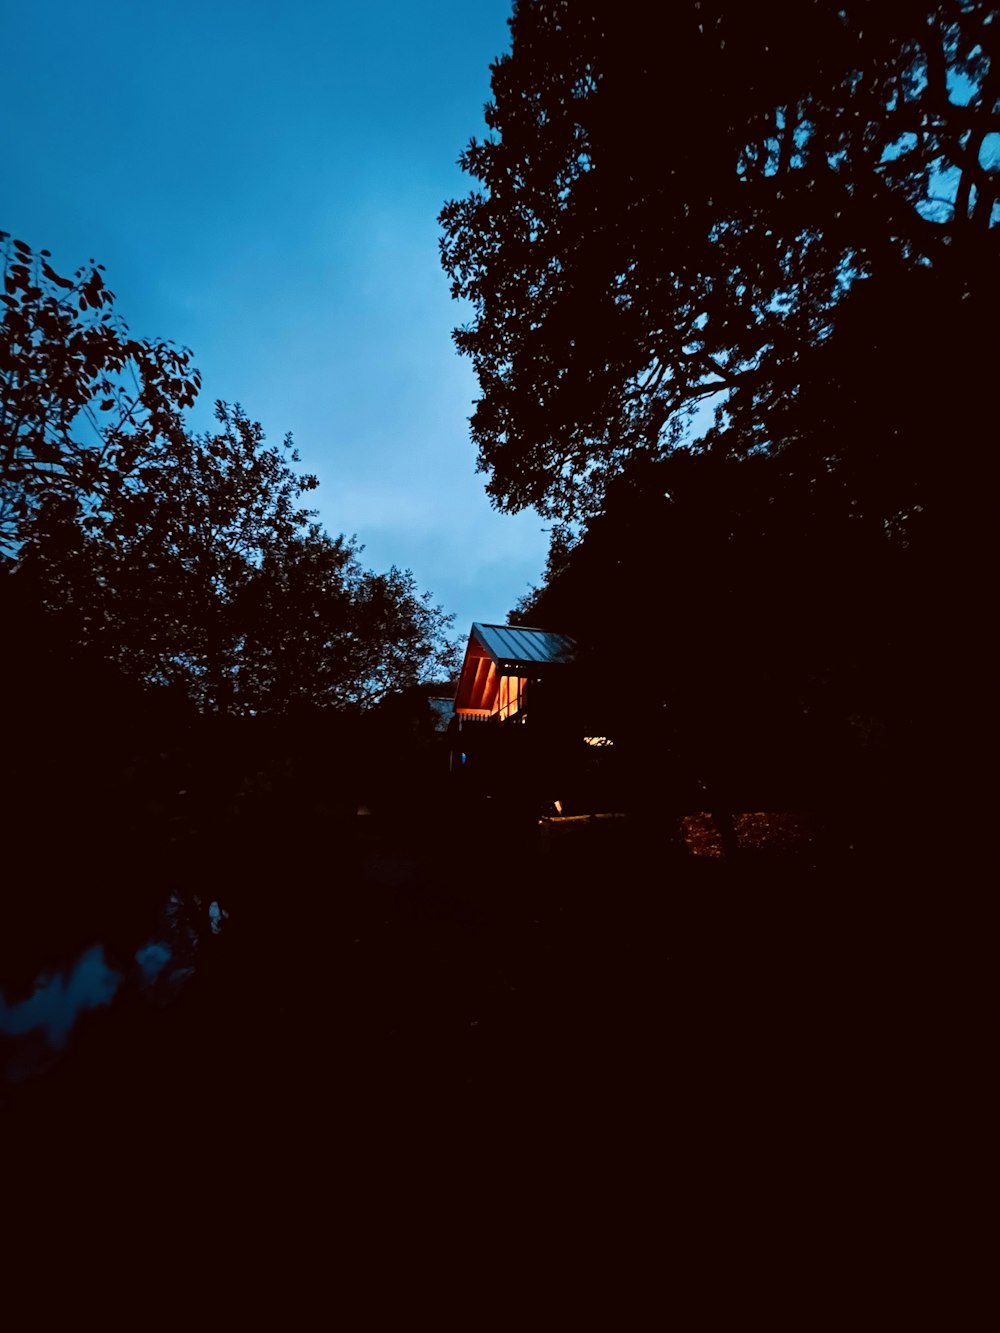 a house with a blue roof at night